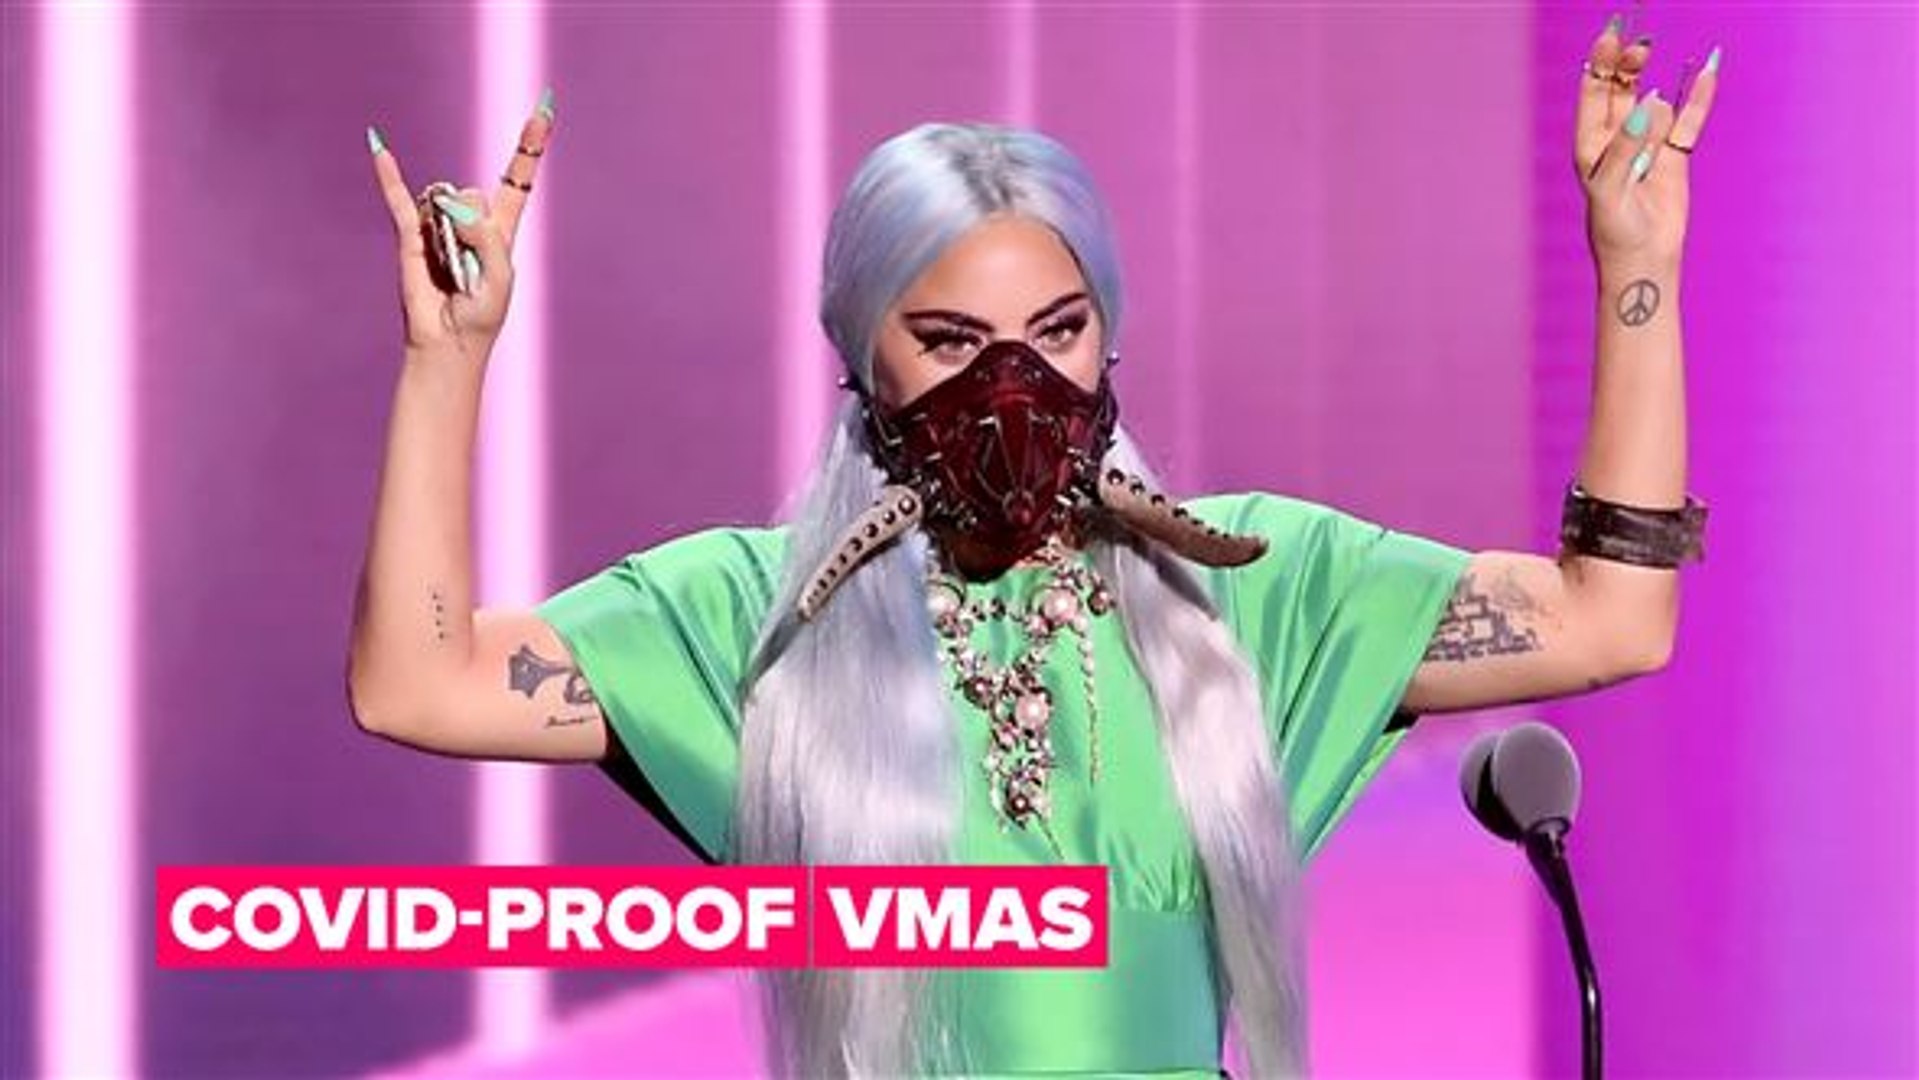 ⁣5 VMA must-see moments, from Gaga’s electro mask to Doja Cat’s TikTok dance